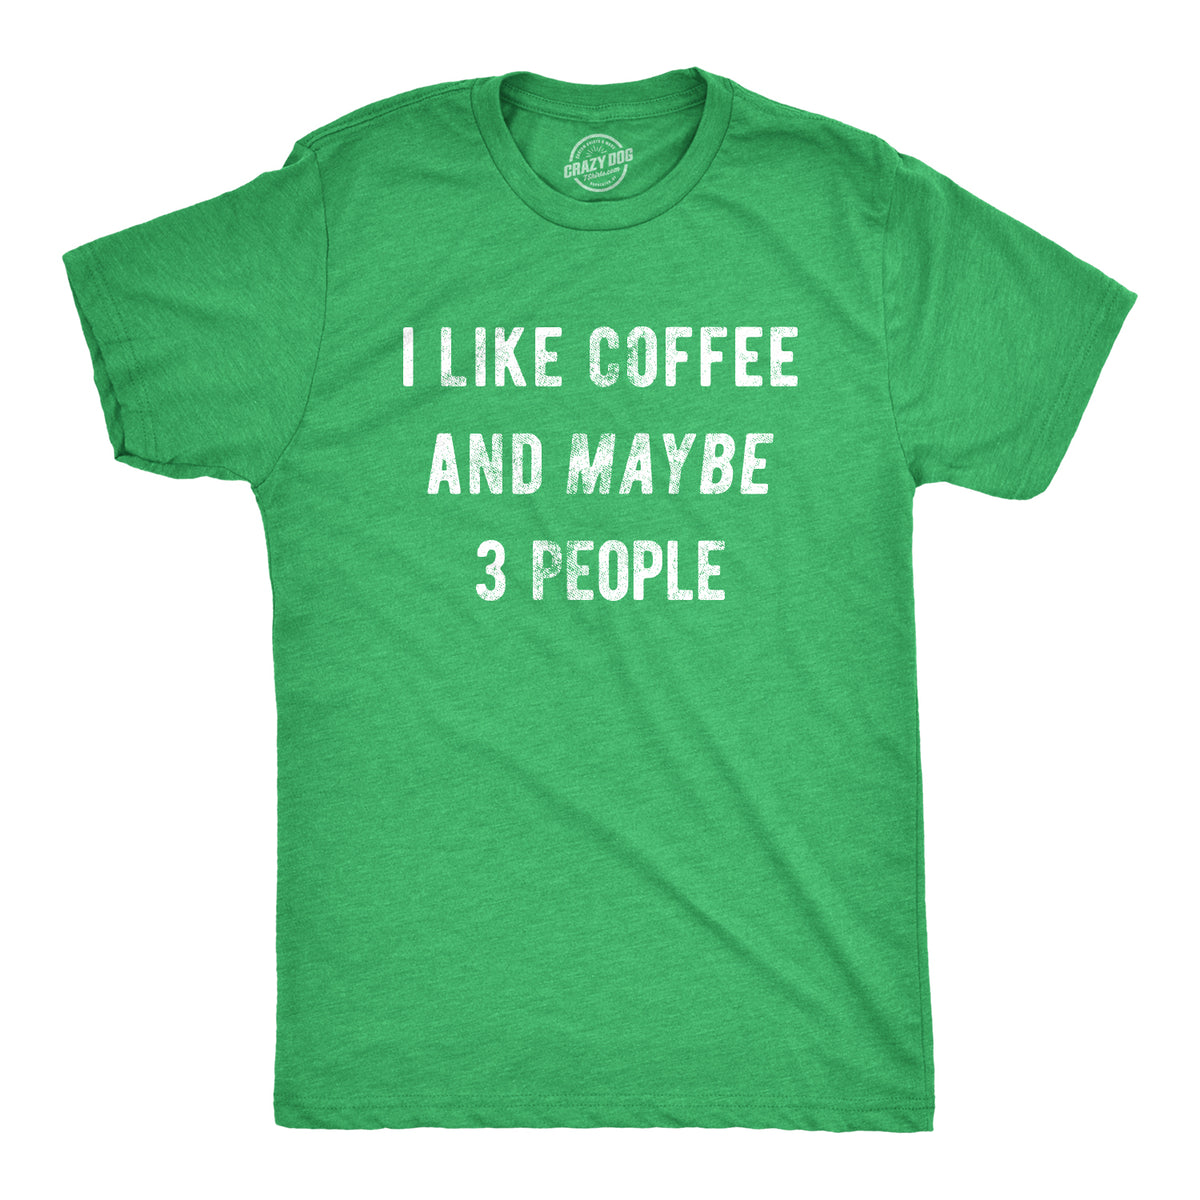 Funny Heather Green I Like Coffee And Maybe 3 People Mens T Shirt Nerdy Coffee Introvert Tee